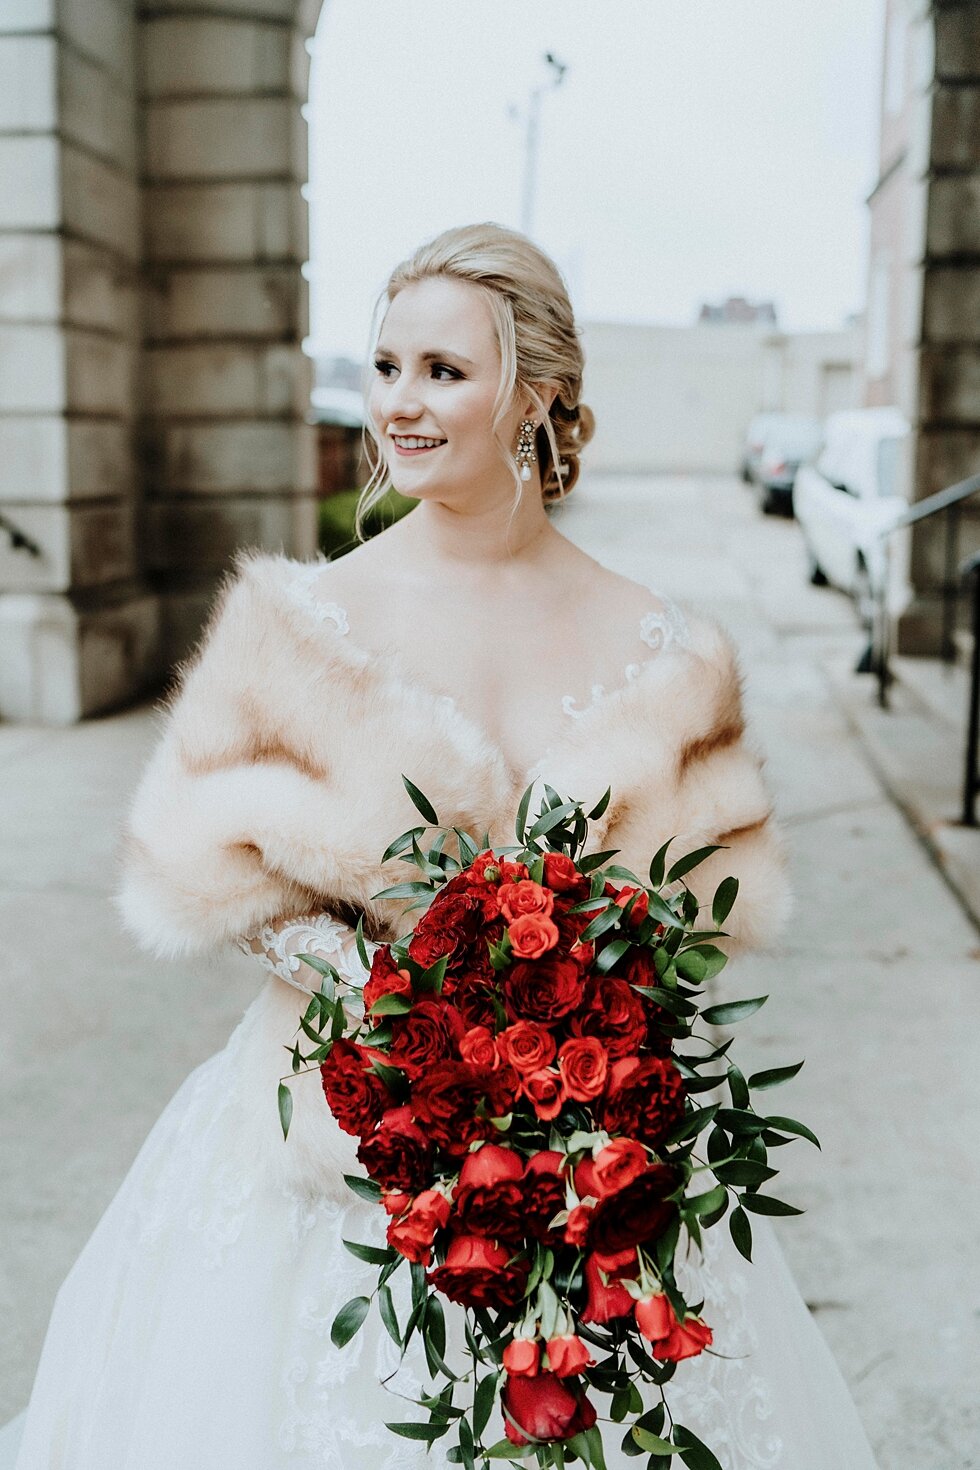  The bride was glowing with beauty as she smiled holding her pop of color bridal bouquet. Brisk February winter wedding Pendennis Club Louisville, Kentucky southern wedding bride and groom carefree wedding breathtaking national register of historic p